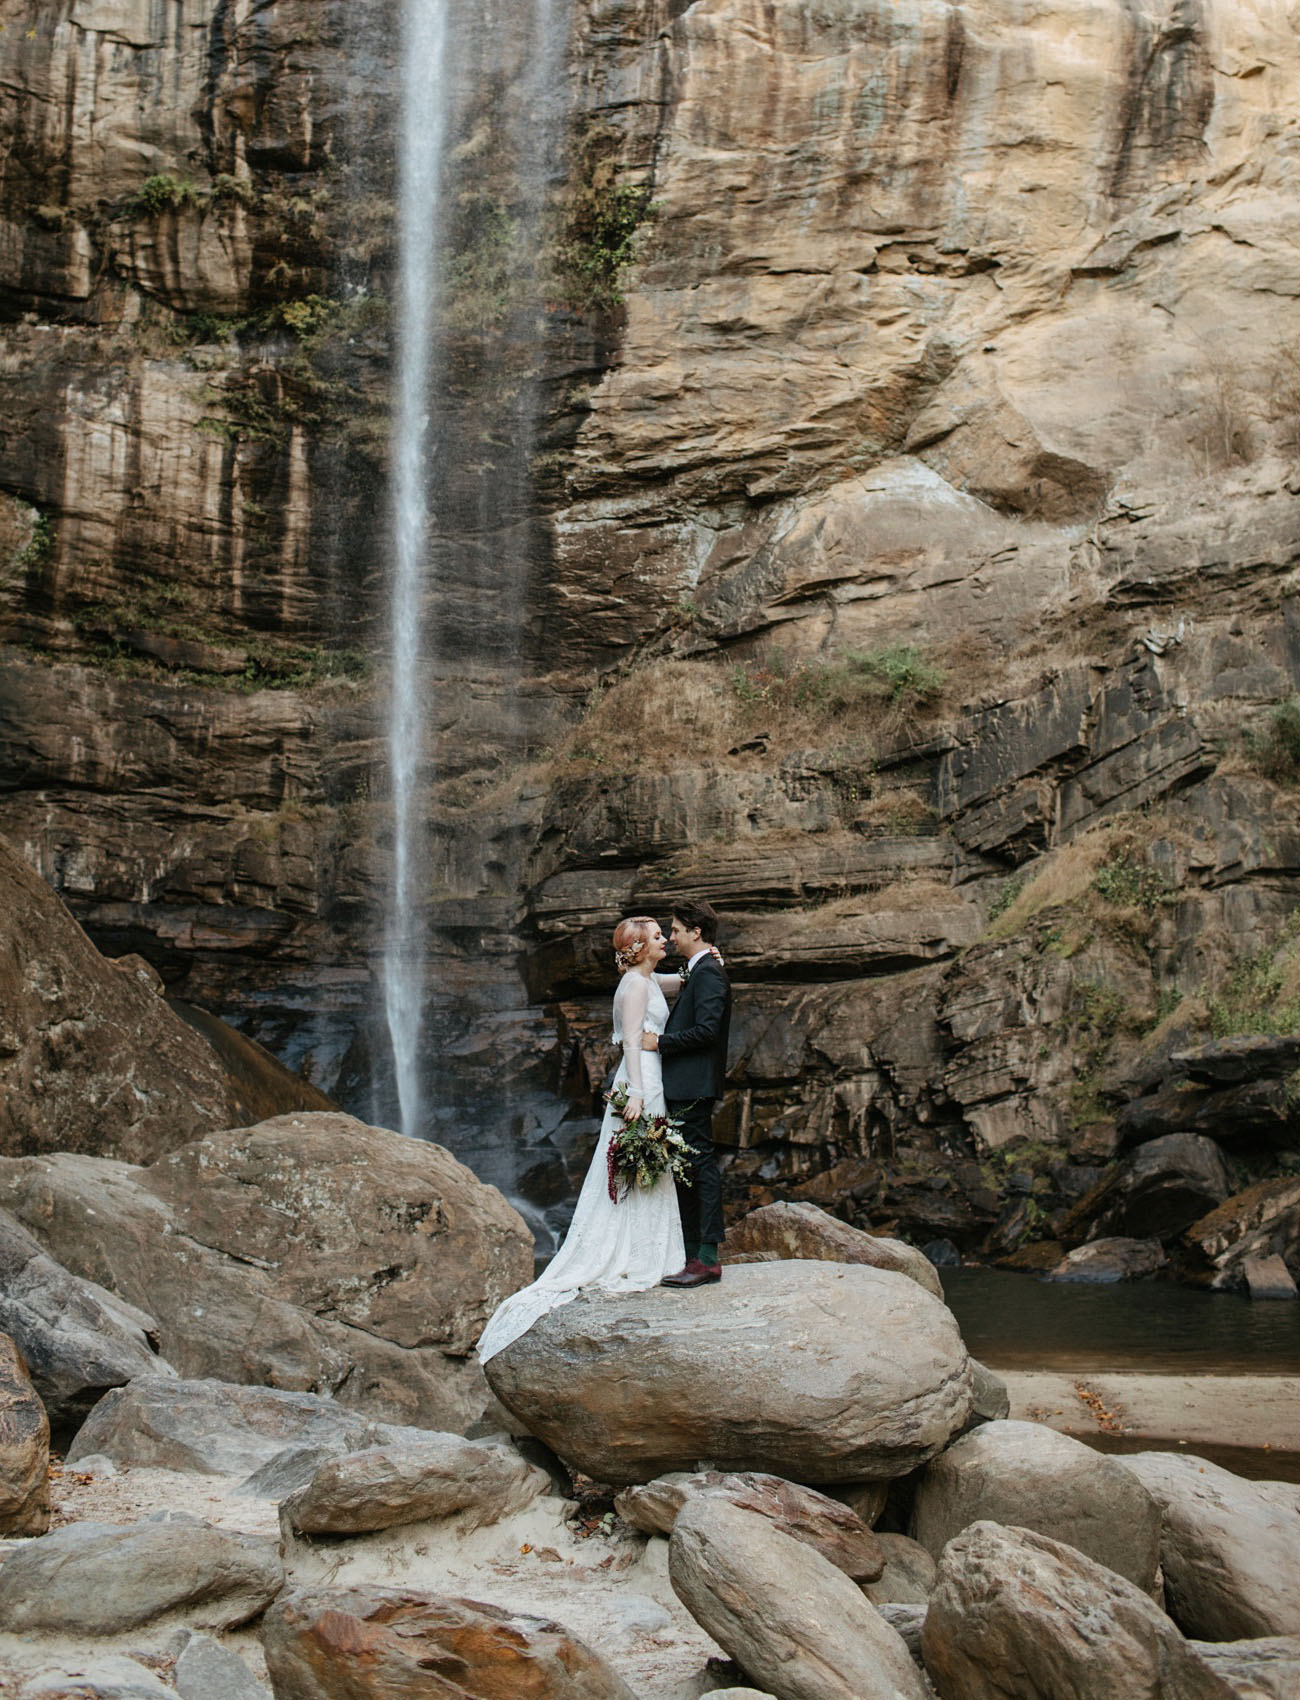 This wedding took place at a waterfall in a national reserve and was full of gorgeous details